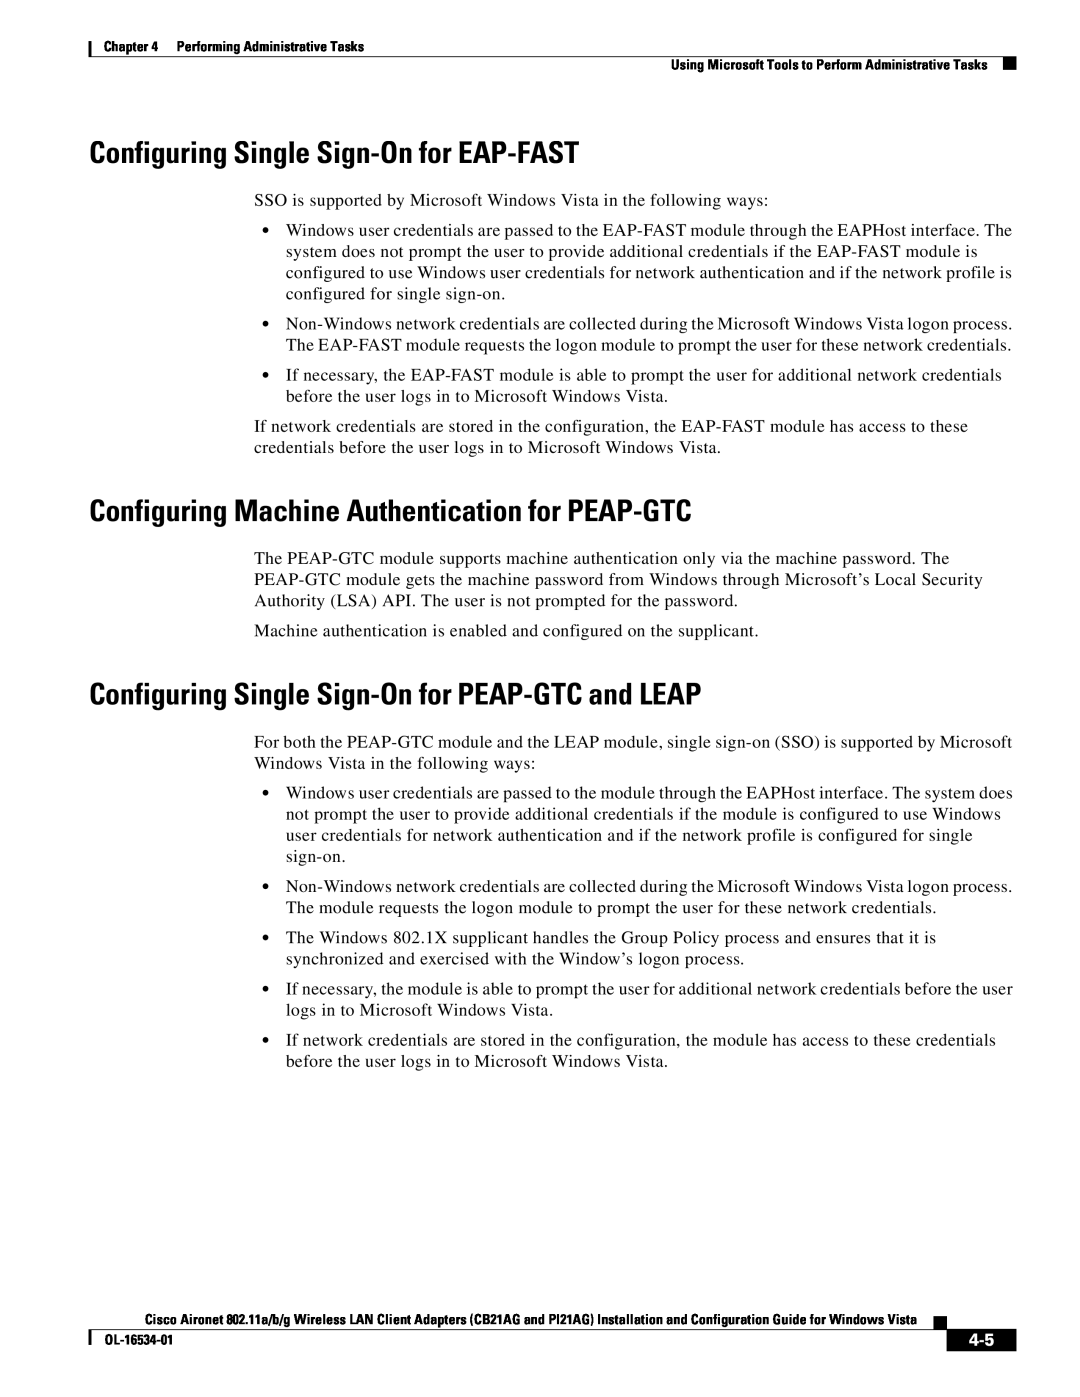 Cisco Systems CB21AG, PI21AG manual Configuring Single Sign-On for EAP-FAST, Configuring Machine Authentication for PEAP-GTC 